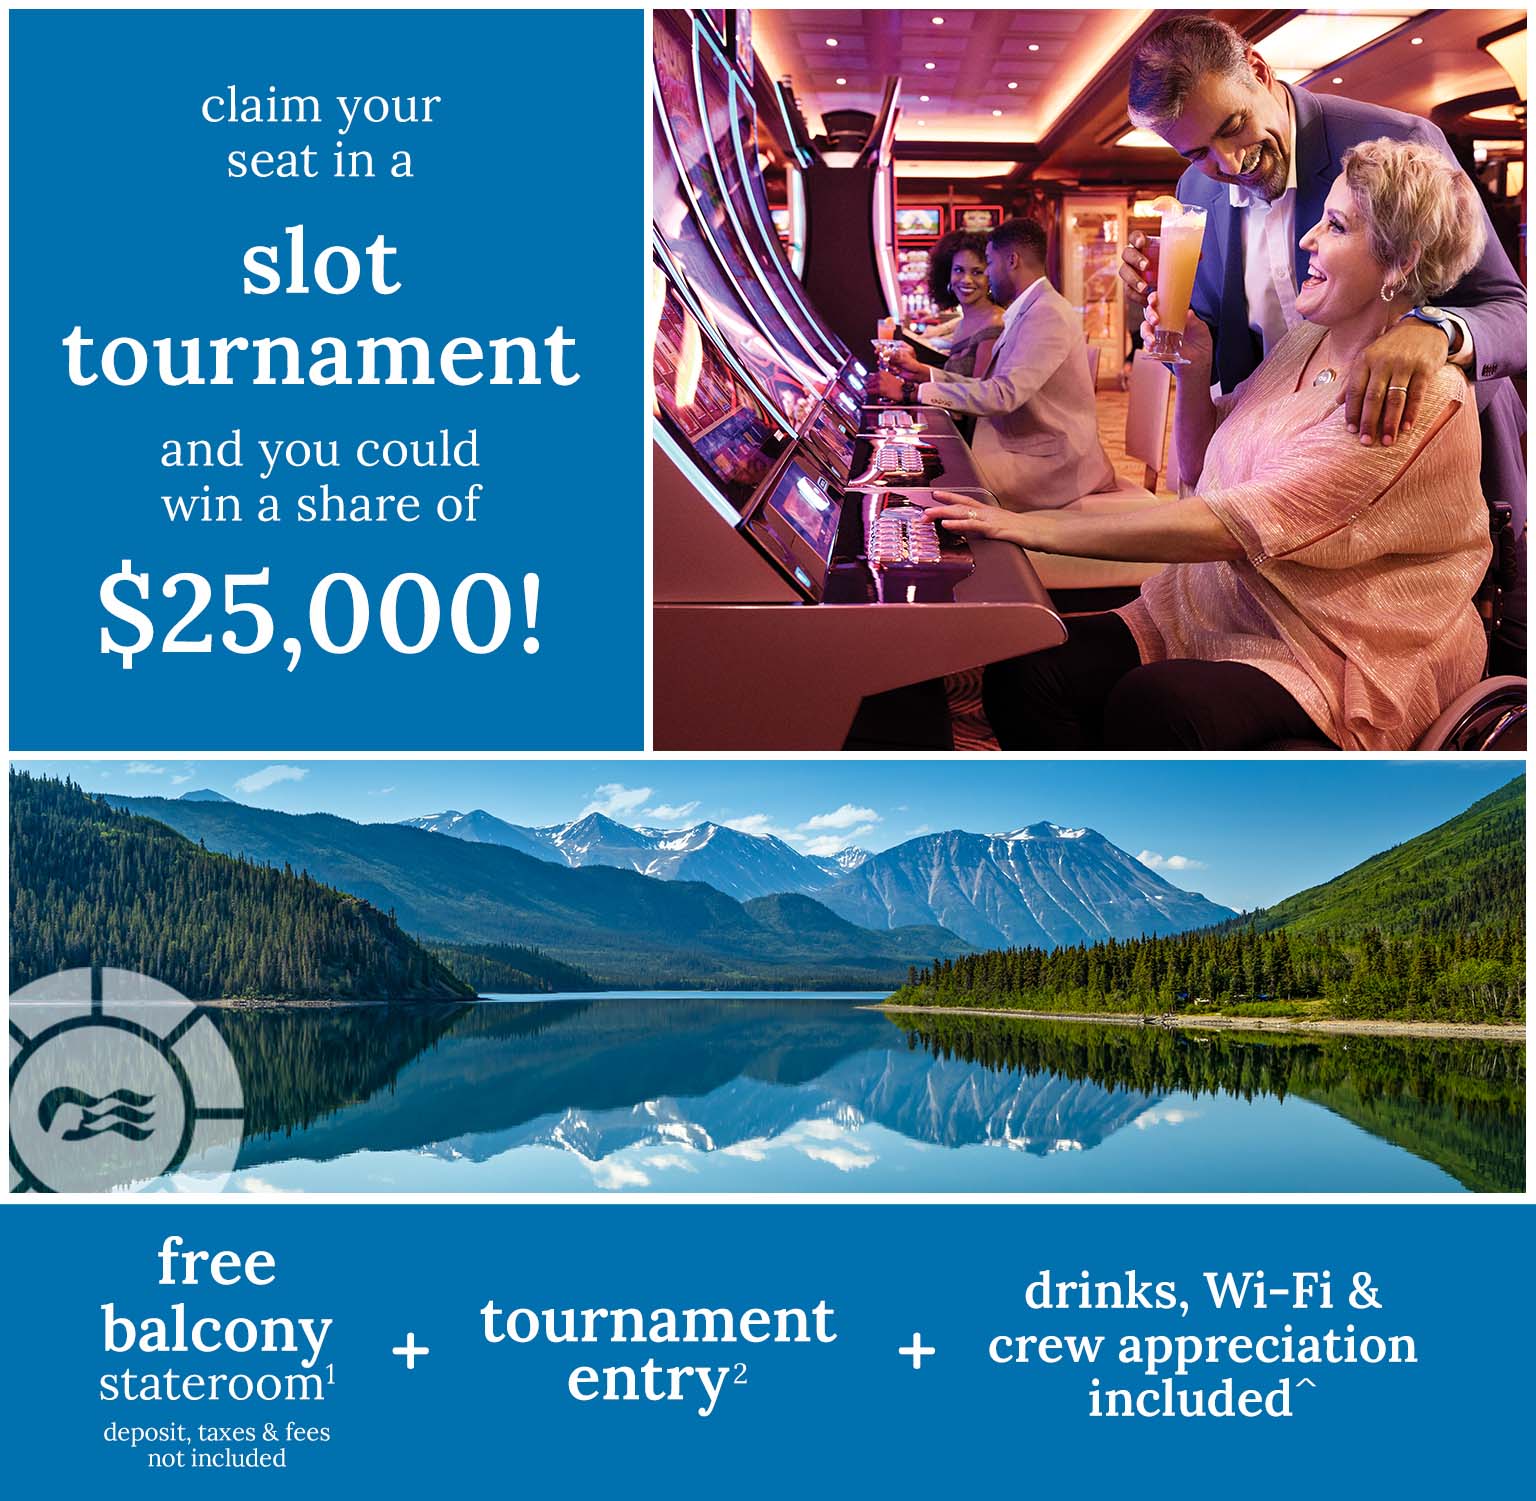 Claim your seat in a slot tournament and you could win a share of $25,000 - free balcony stateroom(1)1 + tournament entry(2) + drinks, wifi & crew appreciation included^